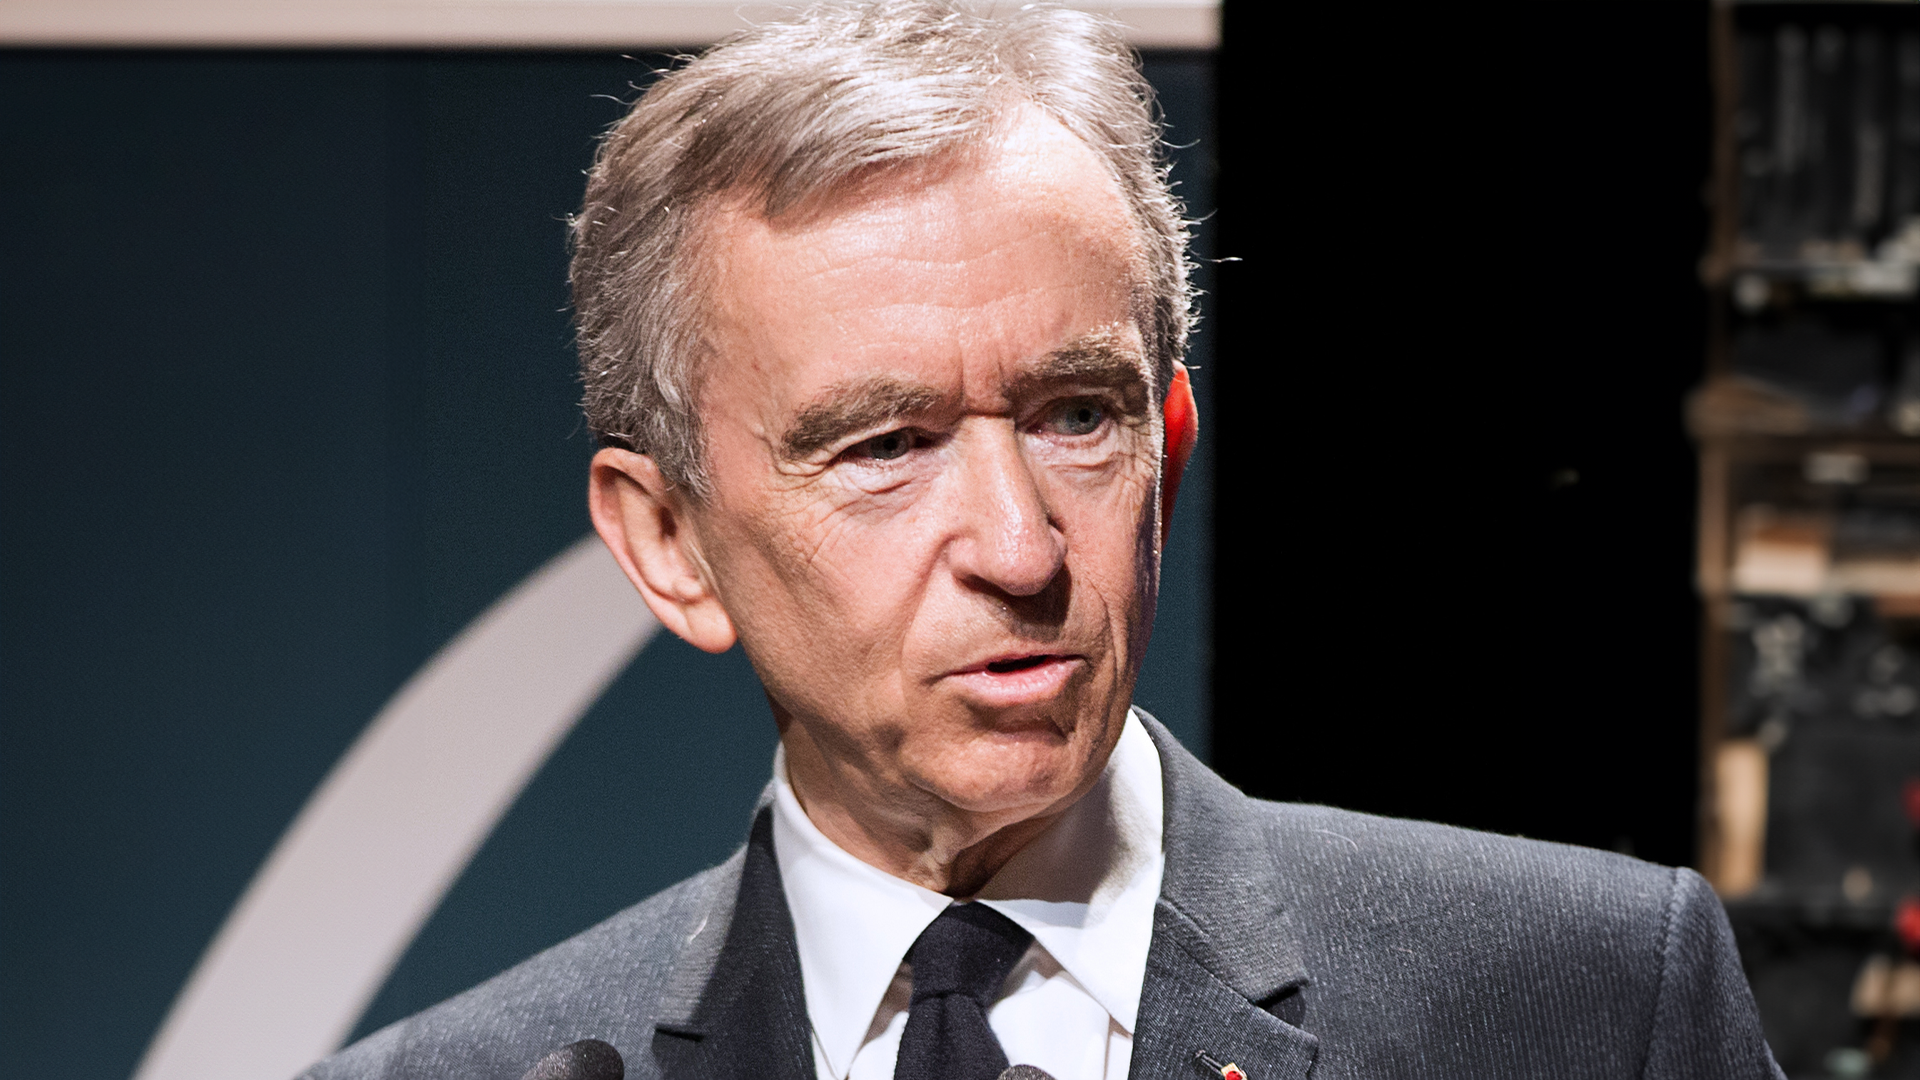 World's richest person Bernard Arnault loses $11B in a single day